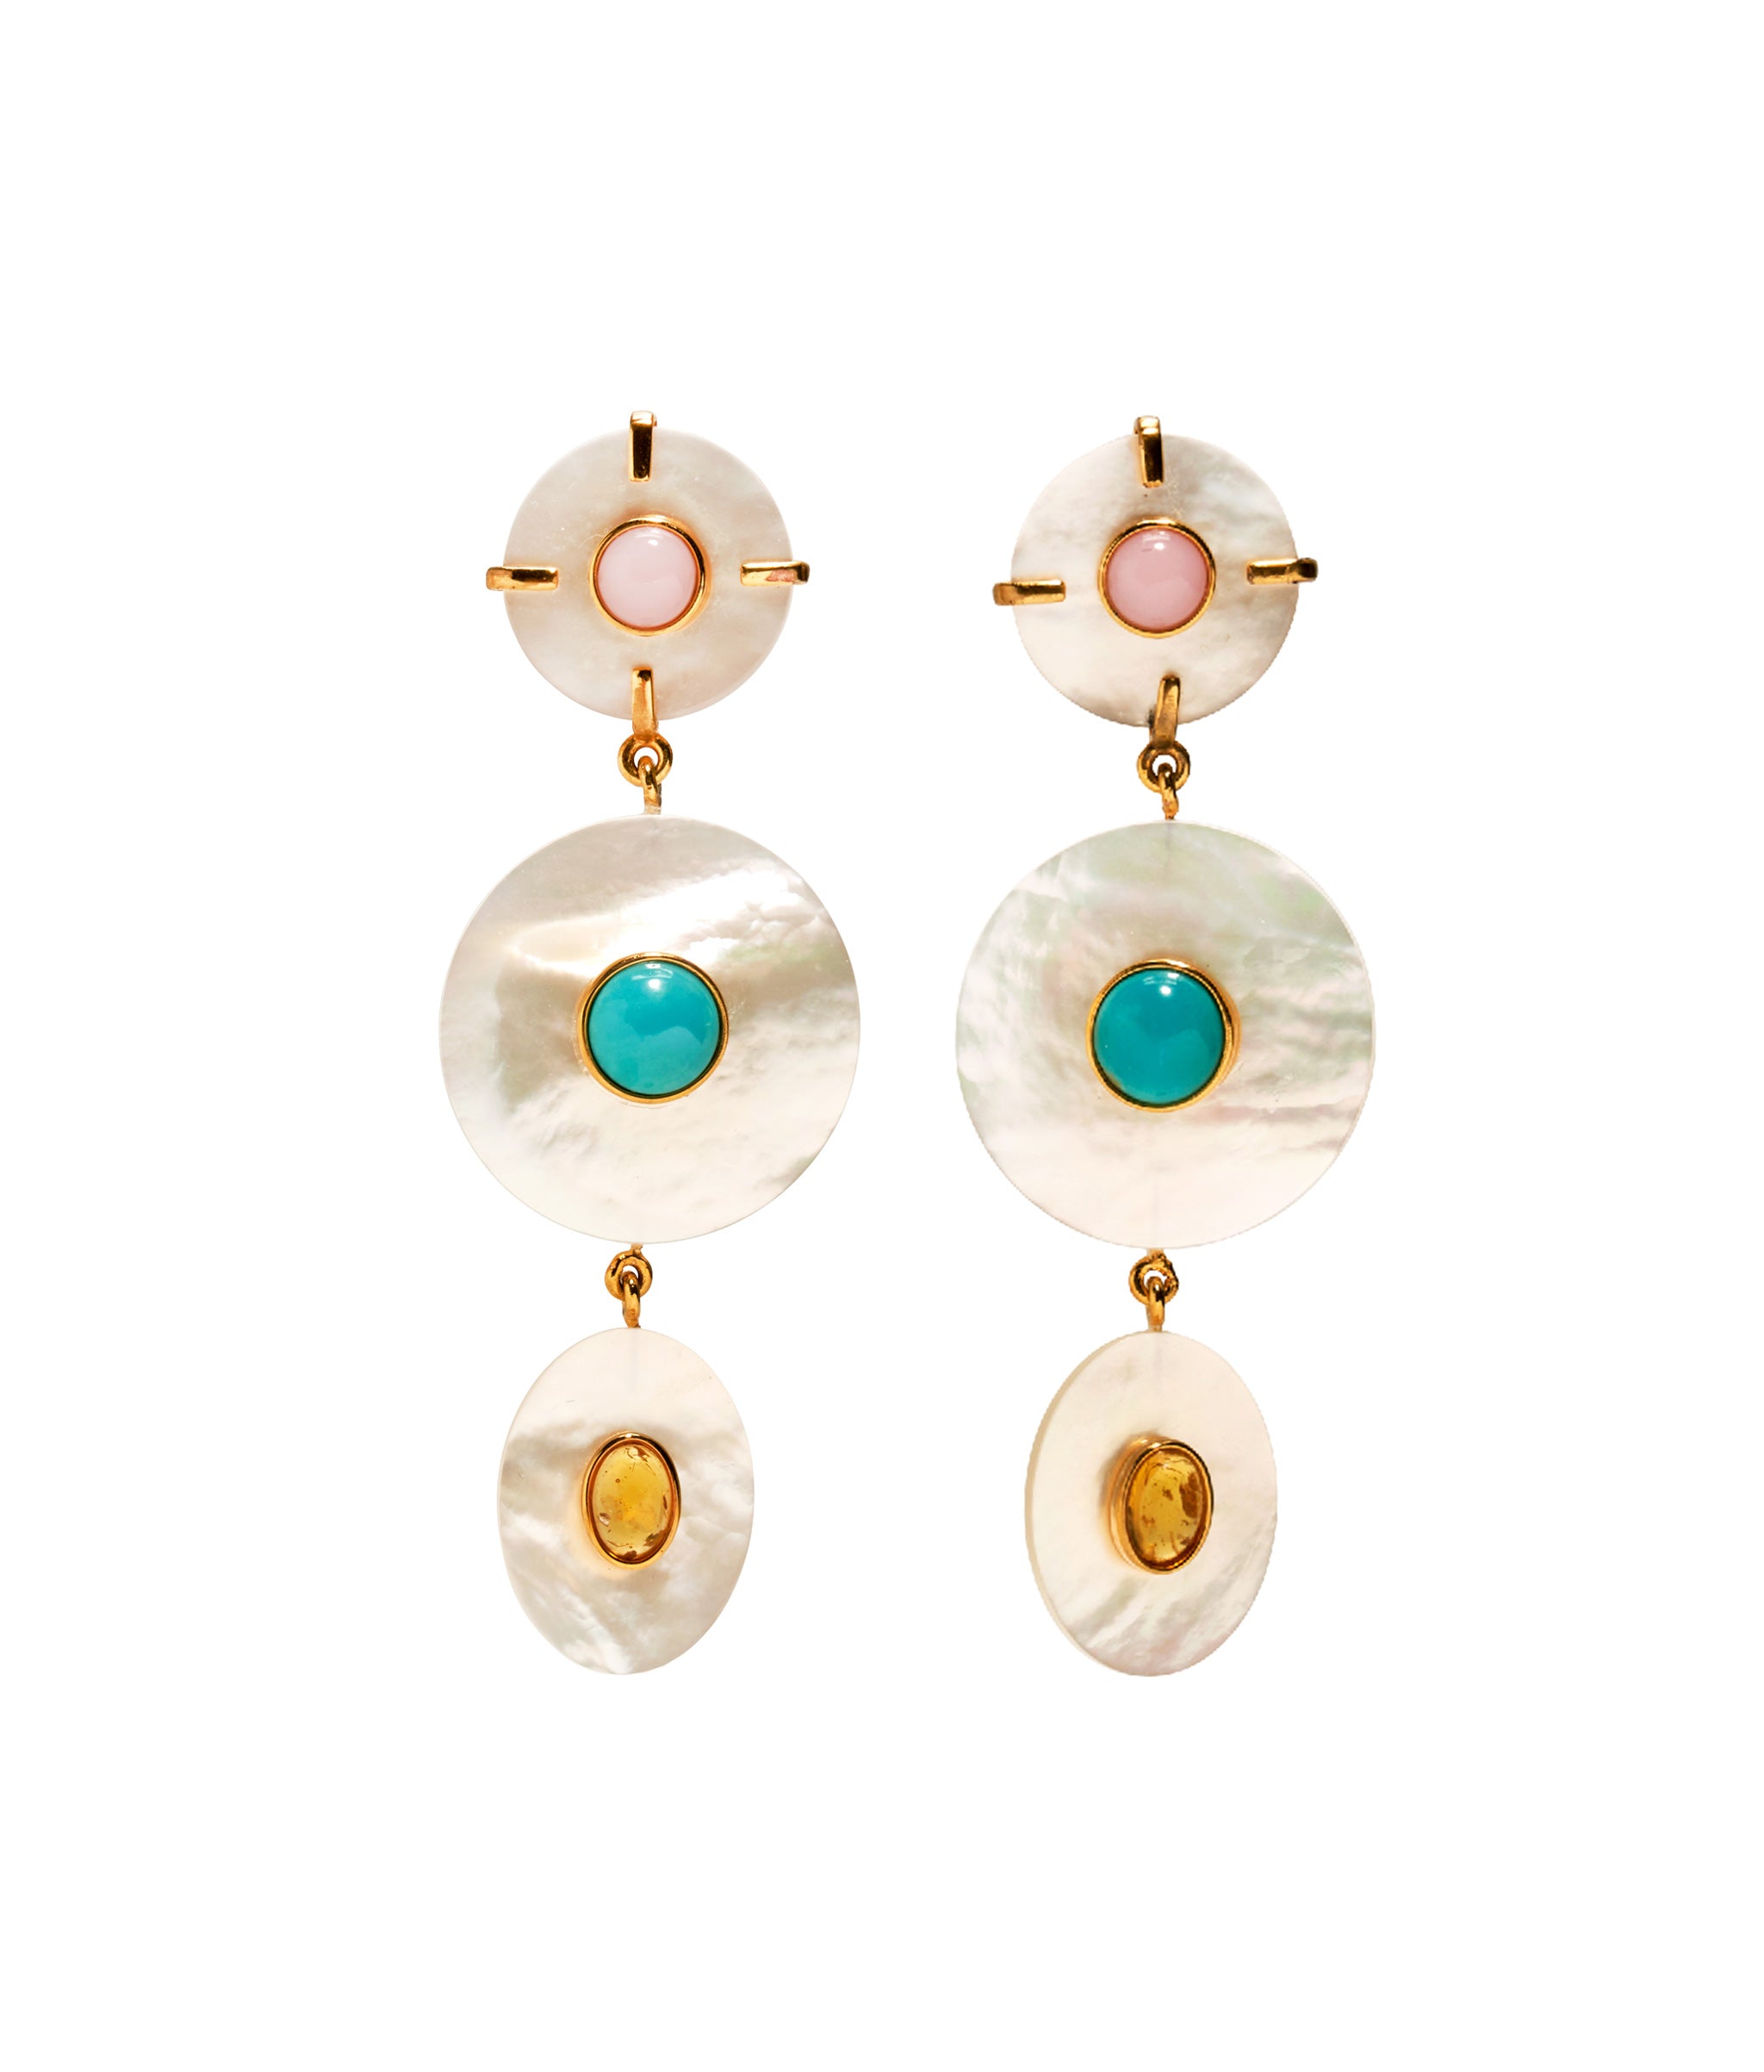 Tropic Pearl Earrings. Mother-of-pearl column earrings set with pink conch, turquoise, and reconstituted amber stones.